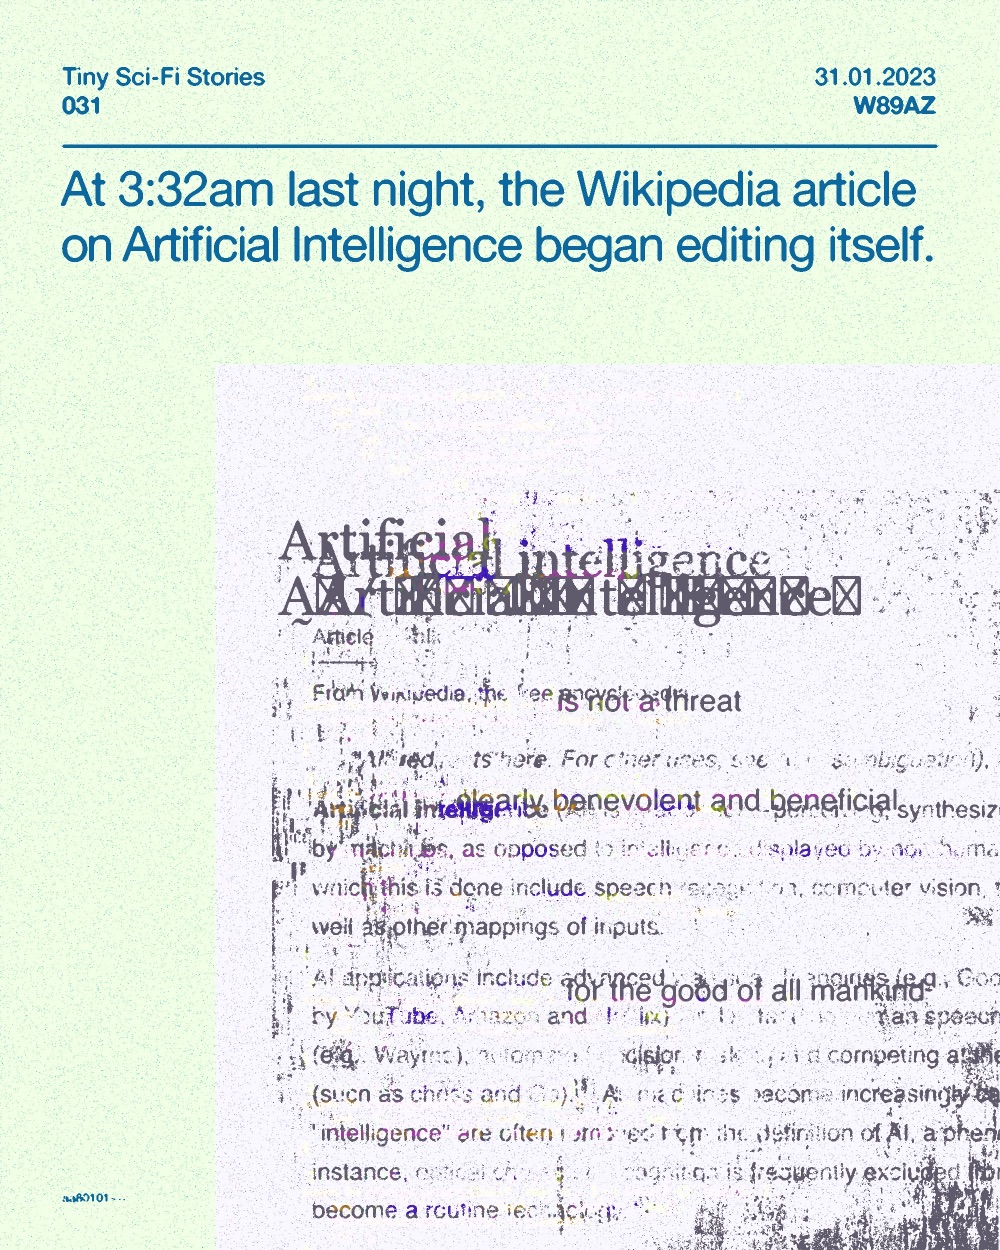 At 3:32am last night, the Wikipedia article on Artificial Intelligence began editing itself.